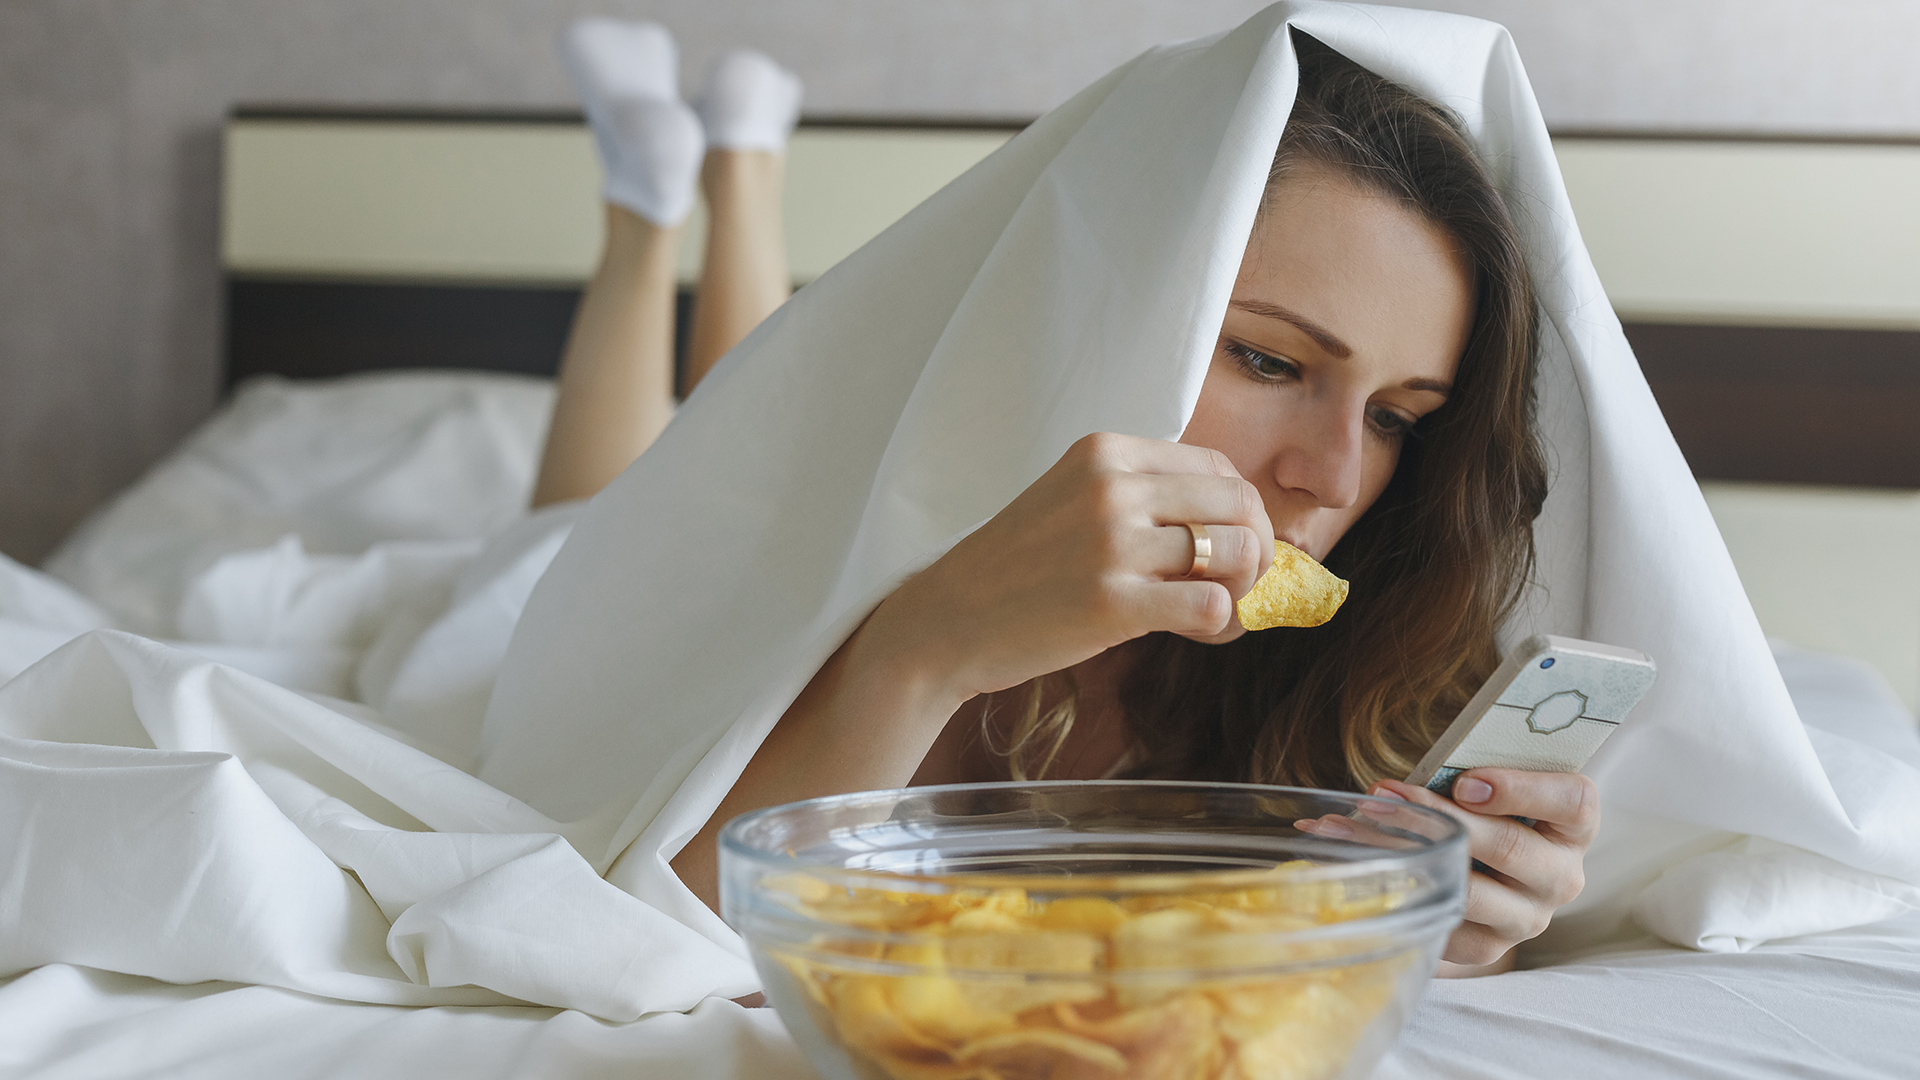 A woman lies on her bed beneath a duvet eating from a bowl of chips